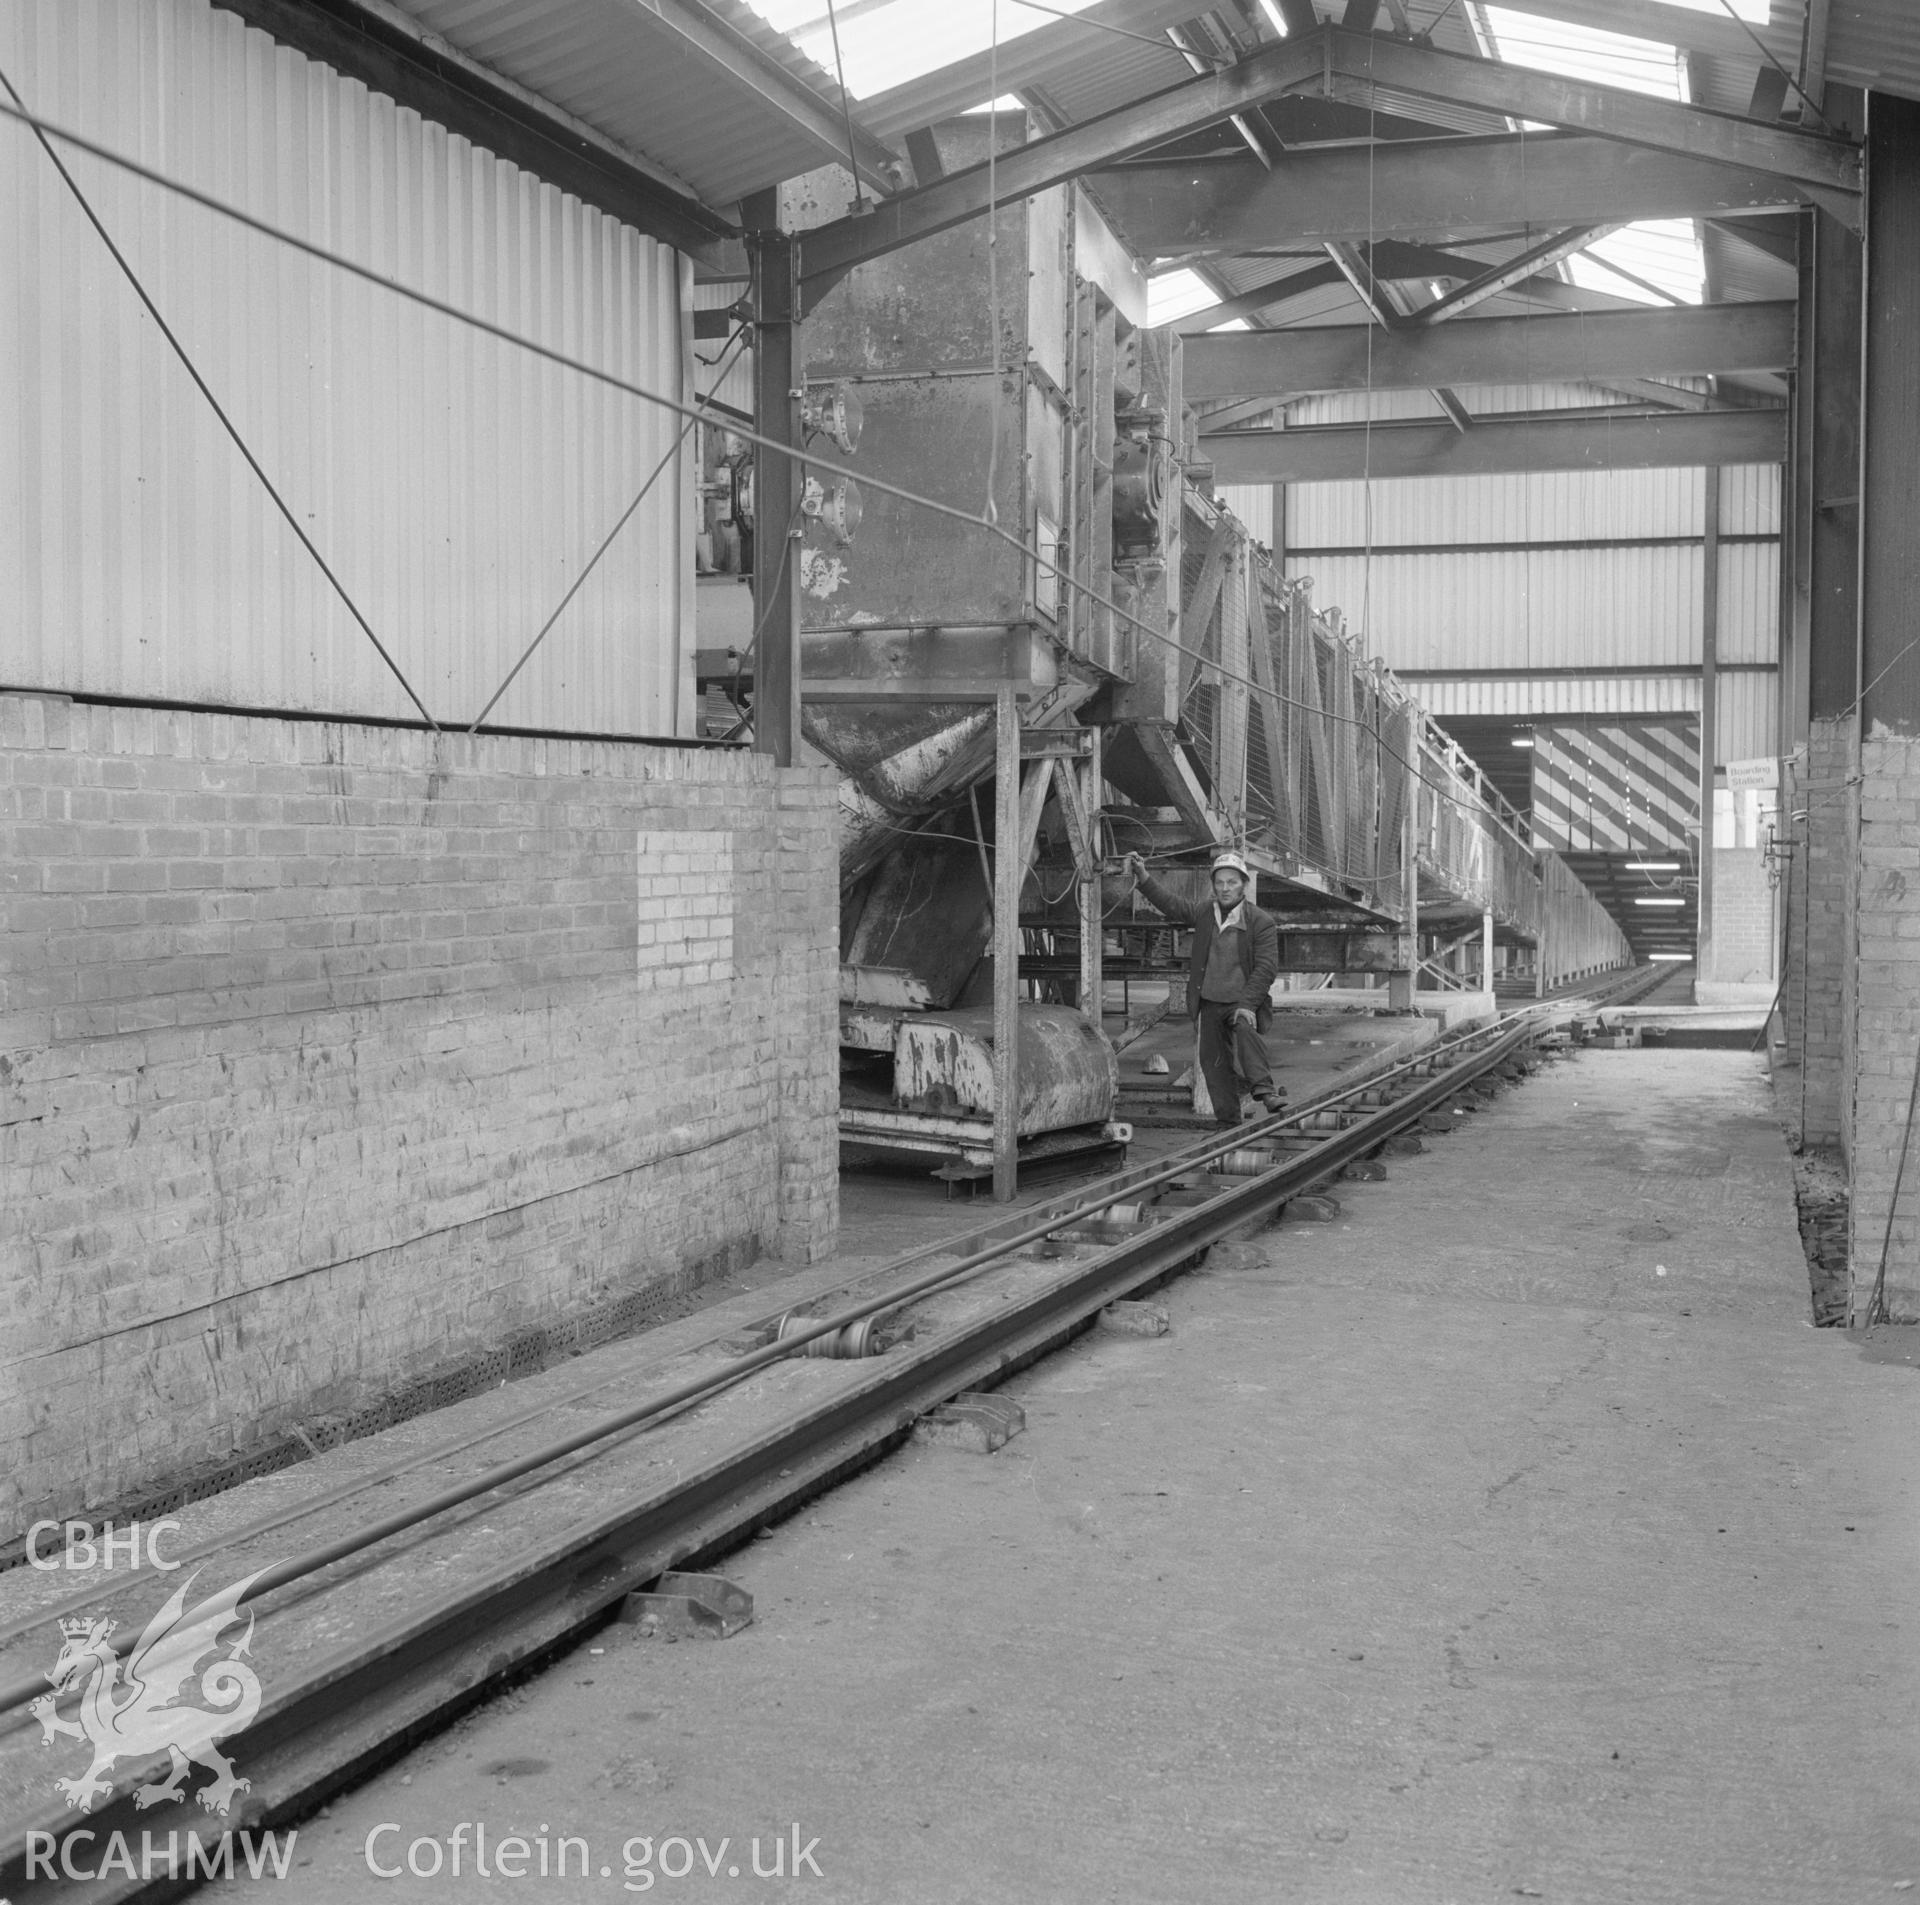 Digital copy of an acetate negative showing head of conveyor at Blaenant Colliery, from the John Cornwell Collection.